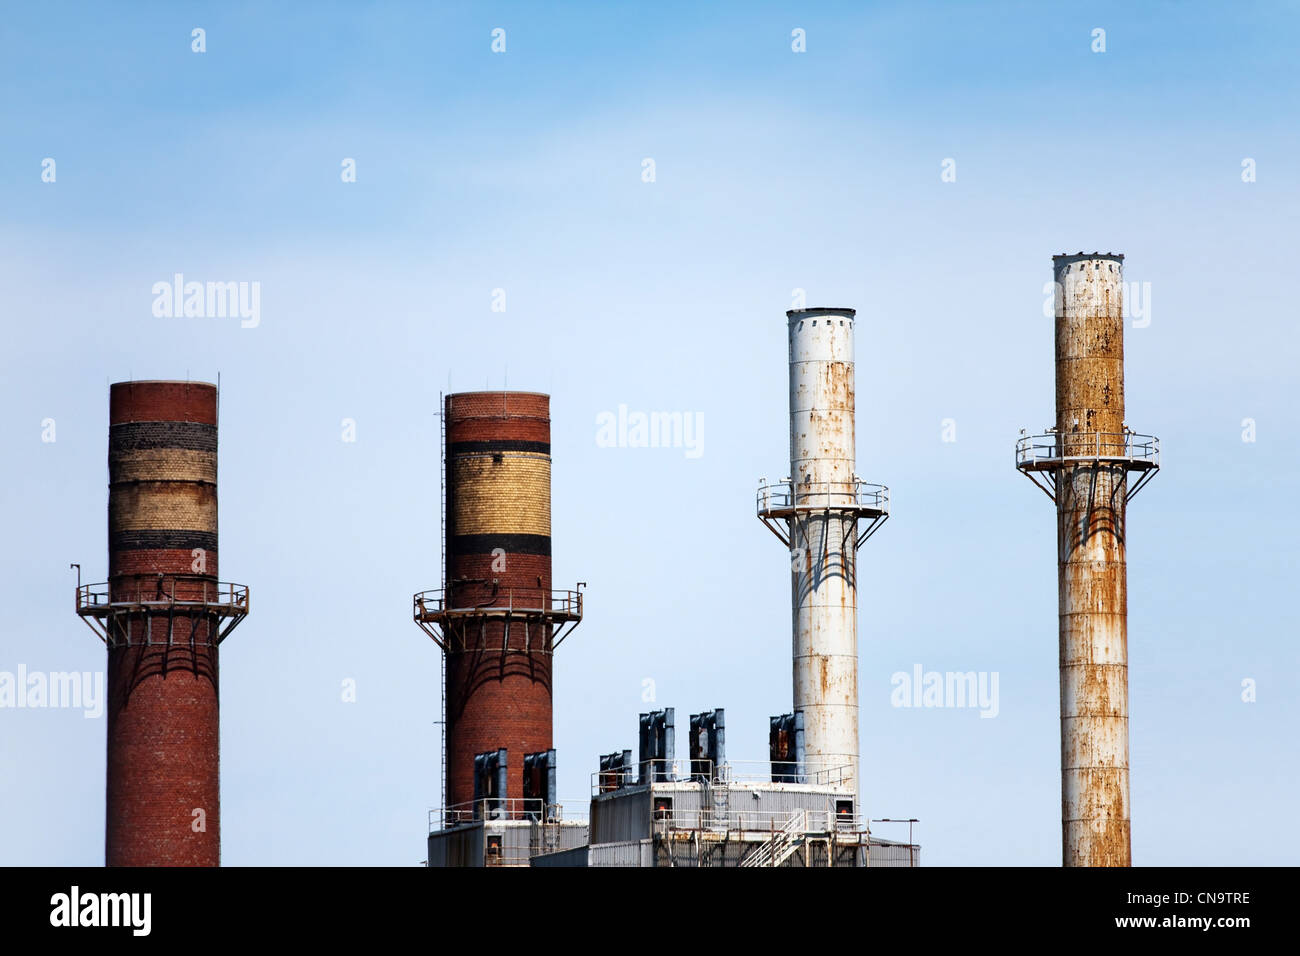 Four smoke stacks atop factories or industrial buildings in the skyline. Stock Photo